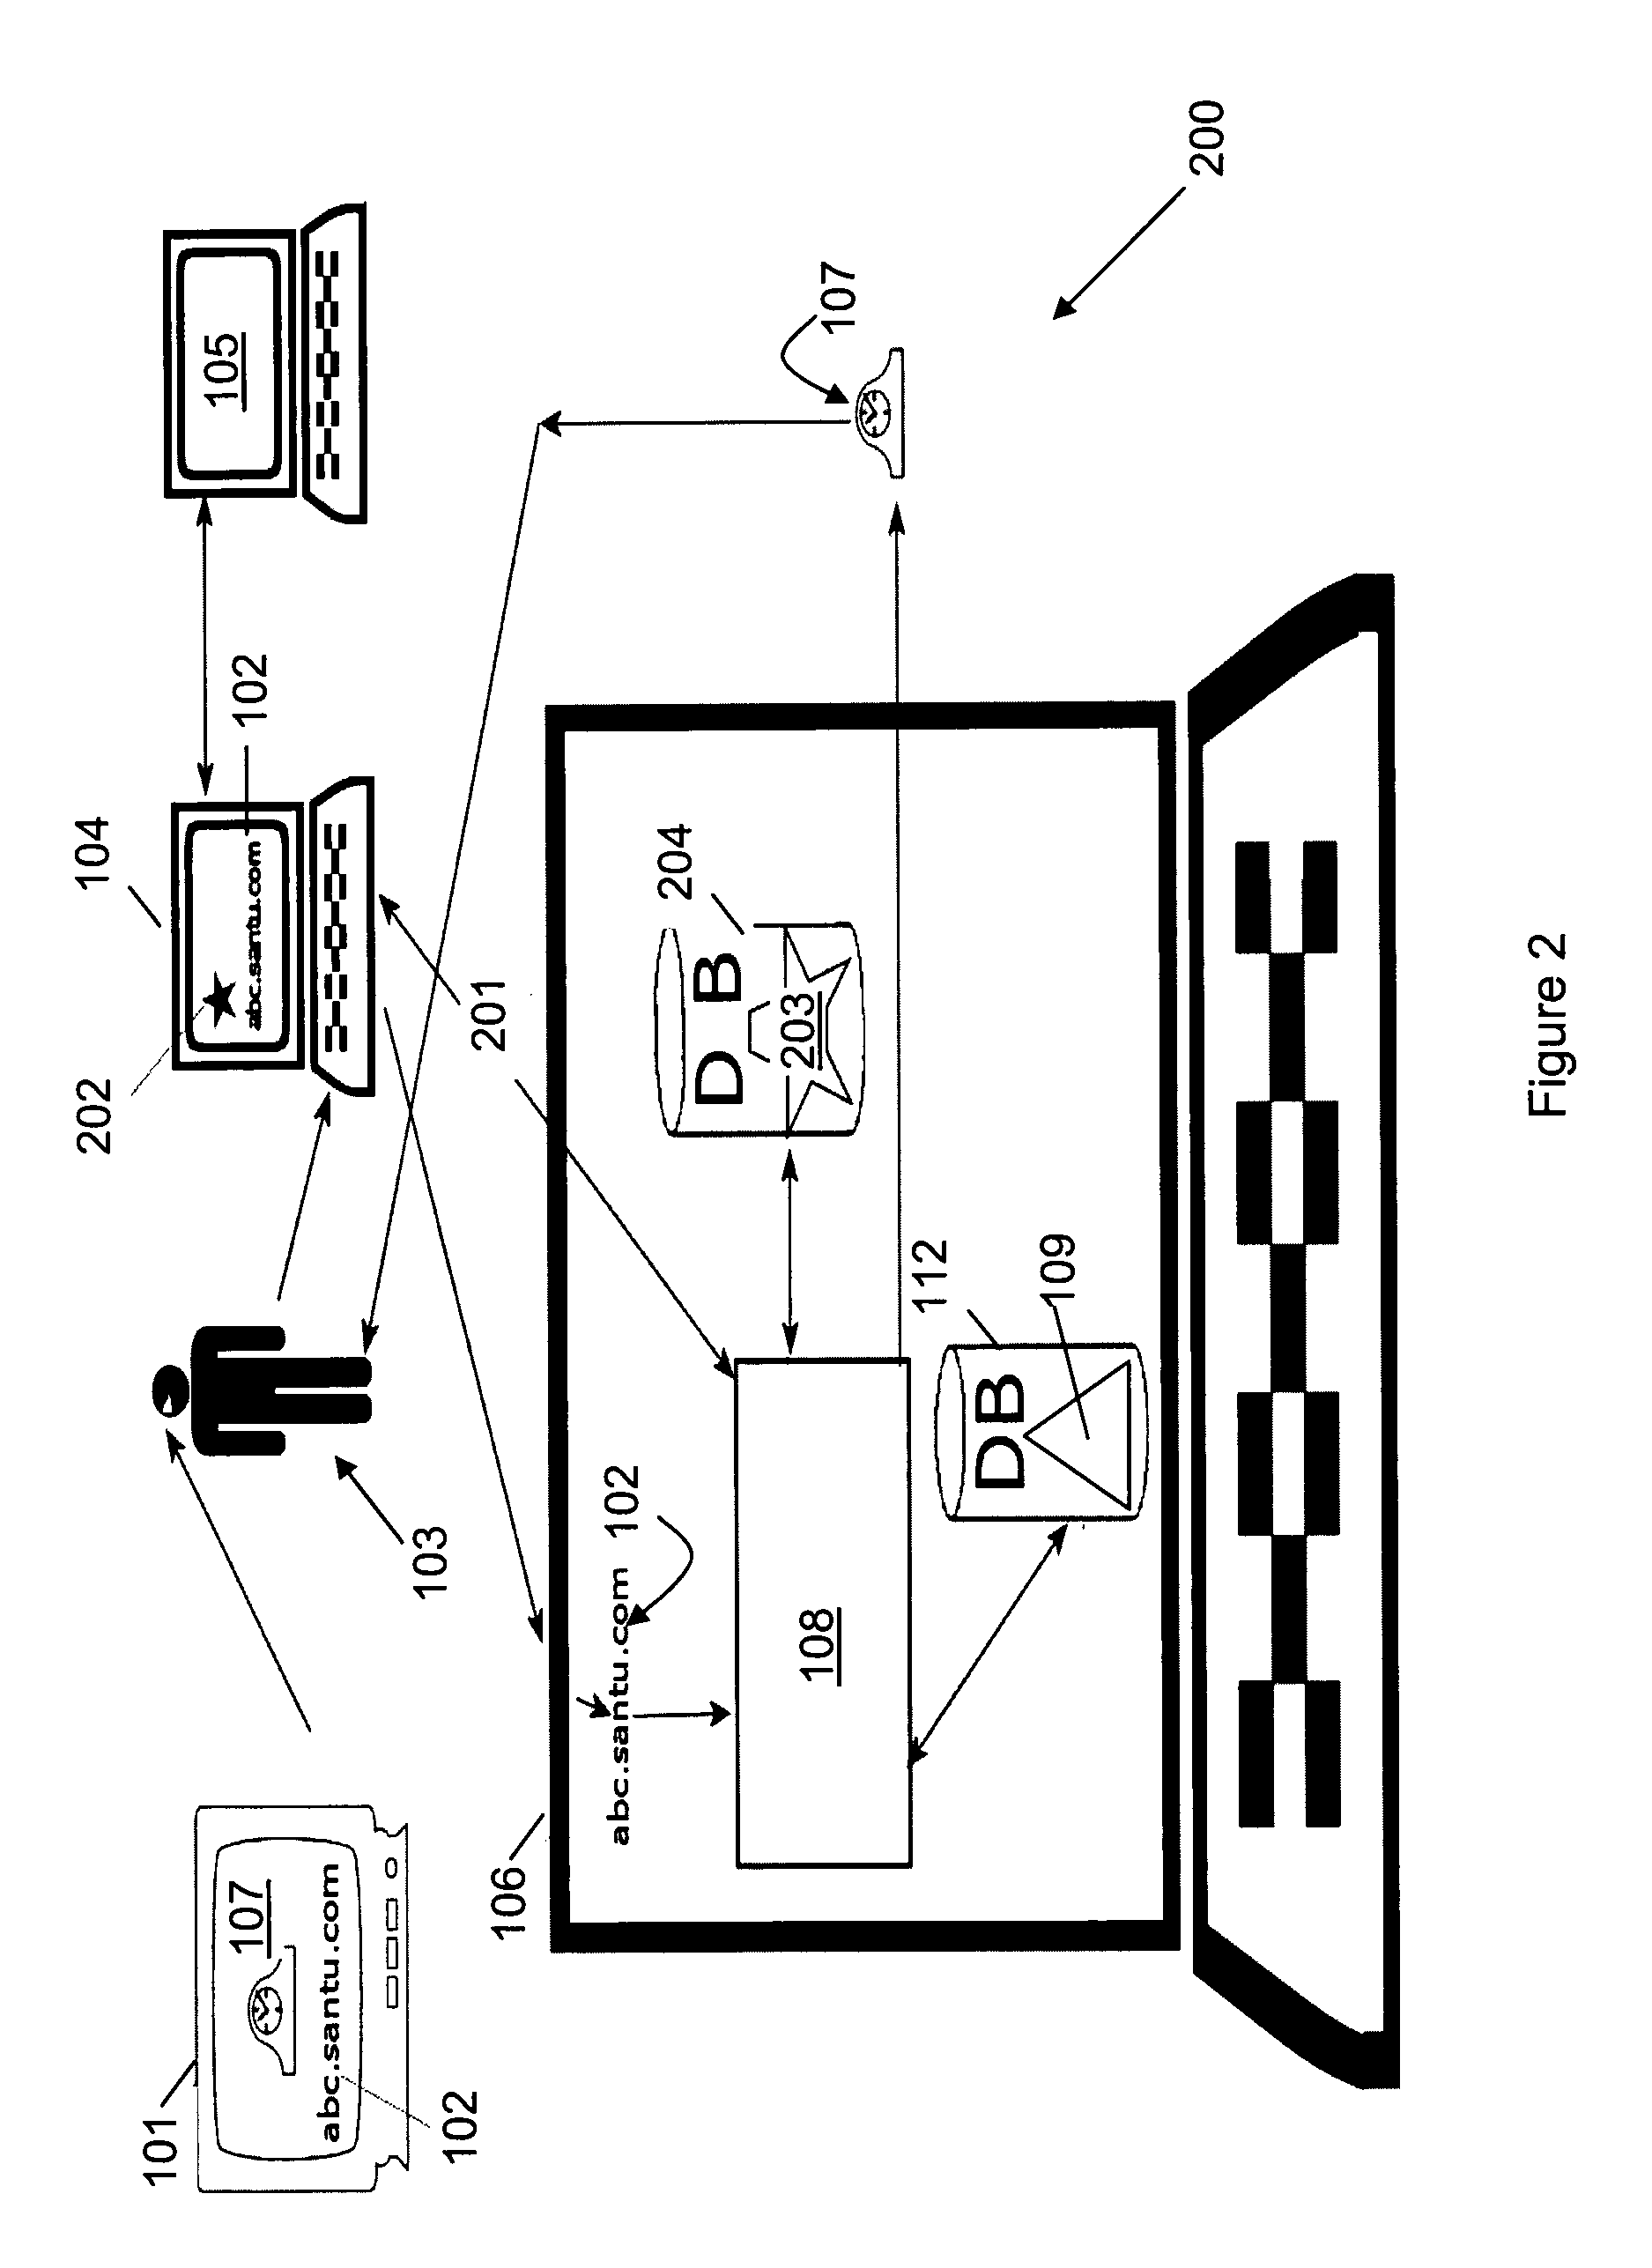 System and method for placing orders via the internet